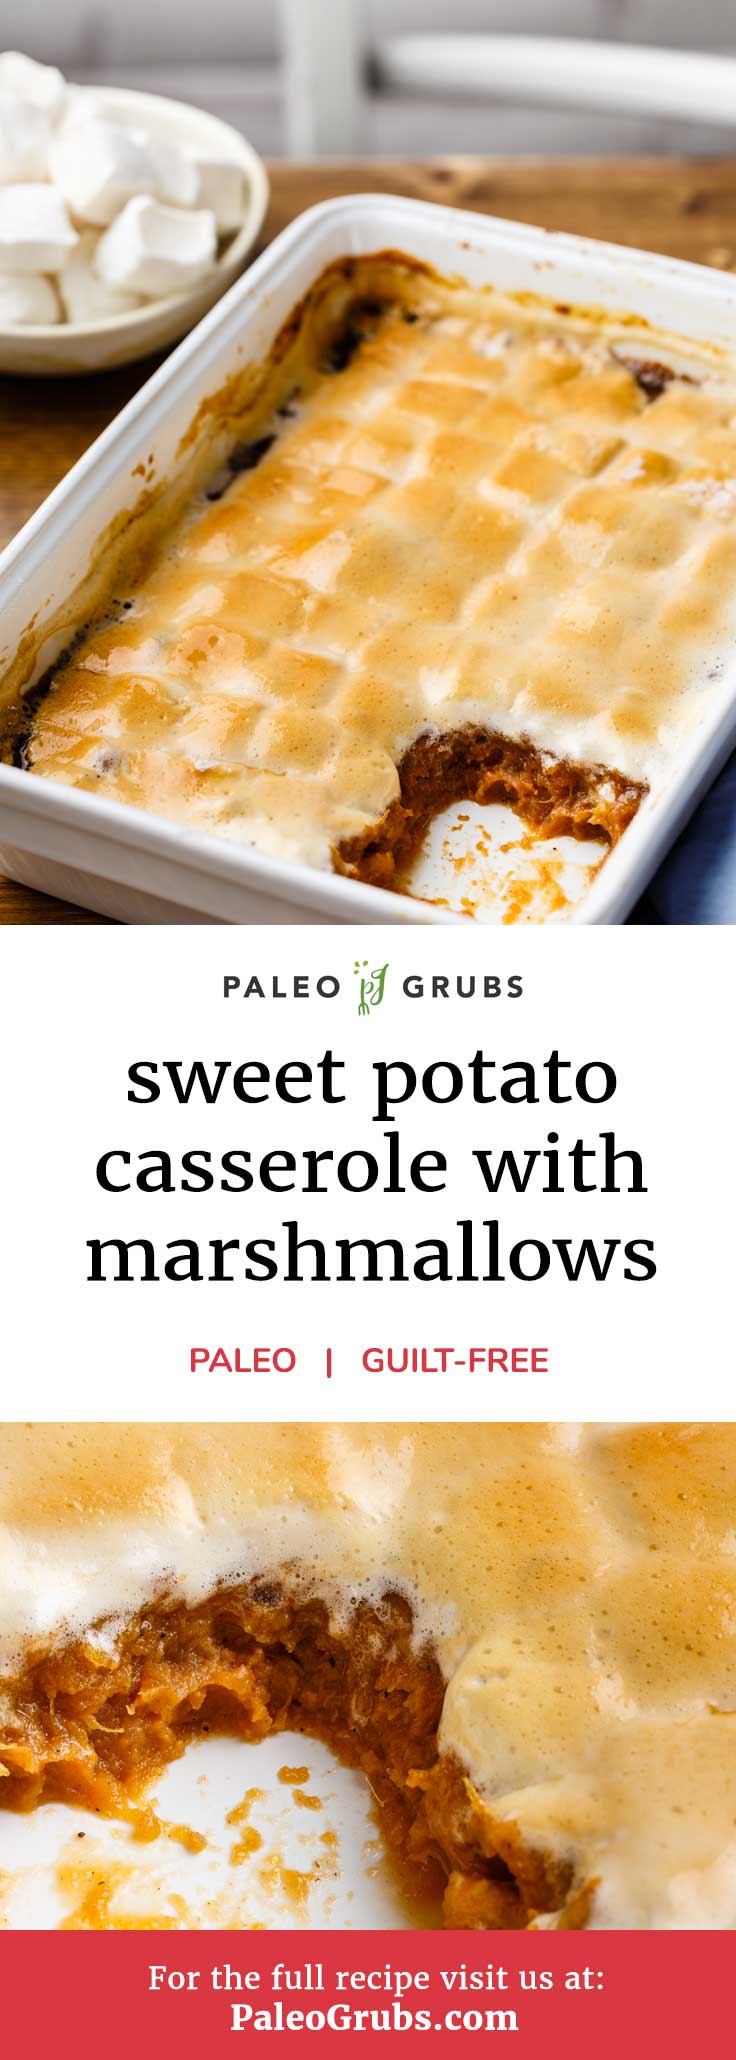 Getting tired of always making the same old casserole recipe for the holidays year after year? Then I’ve got just the thing for you. How about a delicious, 100% paleo-friendly sweet potato casserole with homemade paleo marshmallows? Yes, you read that right! This just might be the greatest casserole dish of all time. It combines a healthy filling with a sweet potato base with unreal marshmallows made with grass fed beef gelatin, honey, vanilla, and arrowroot flour.